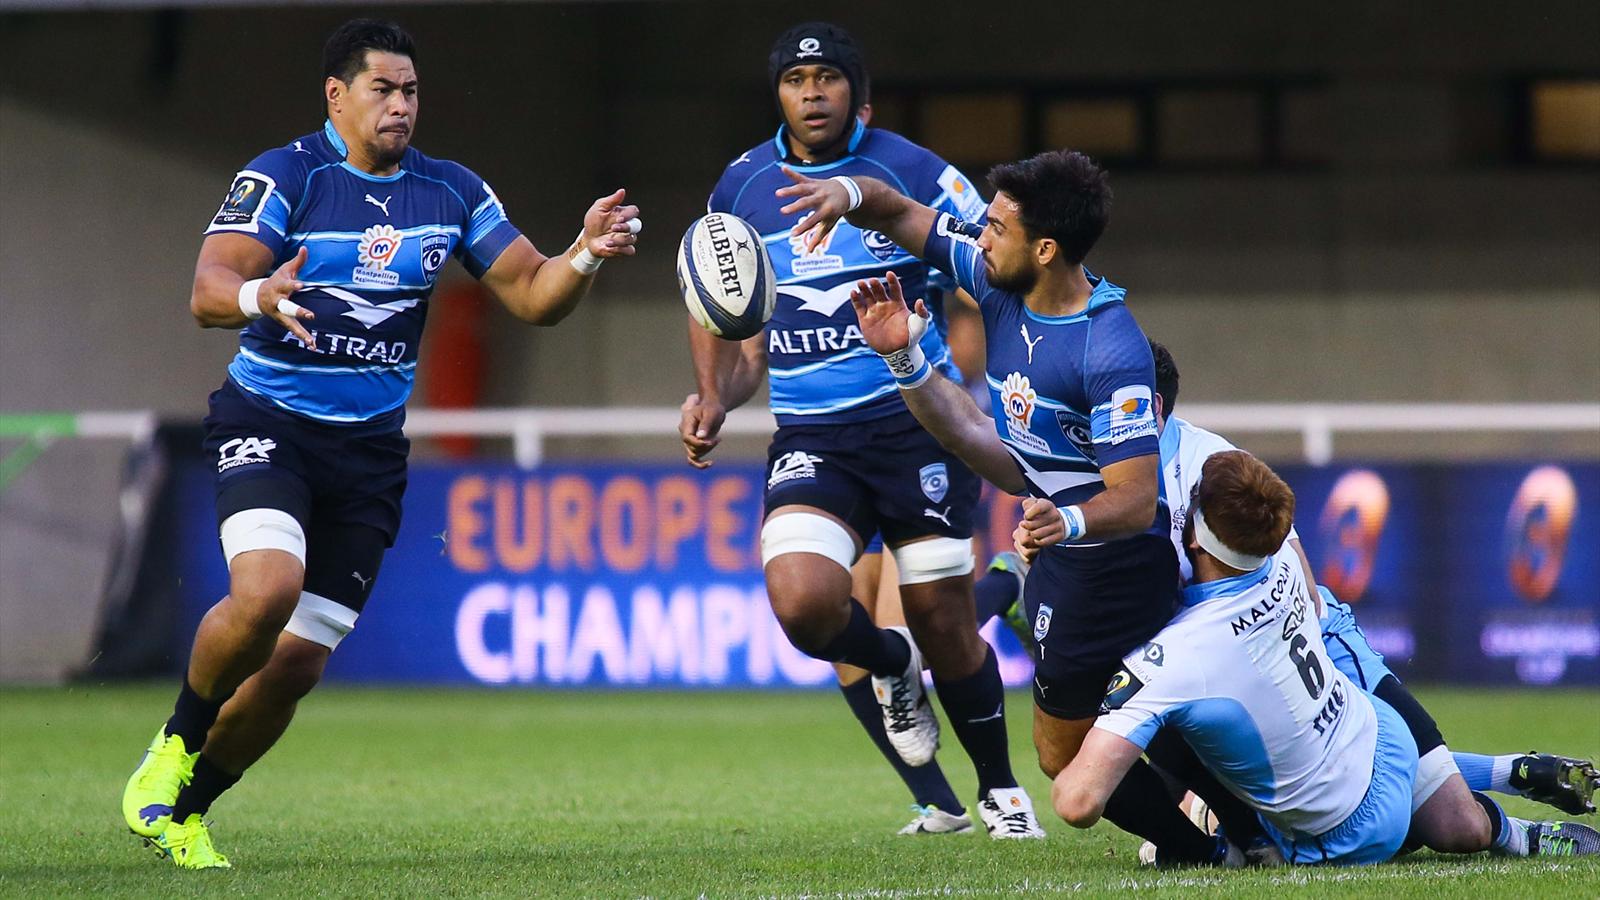 Match Rugby Montpellier vs Bath en direct live streaming